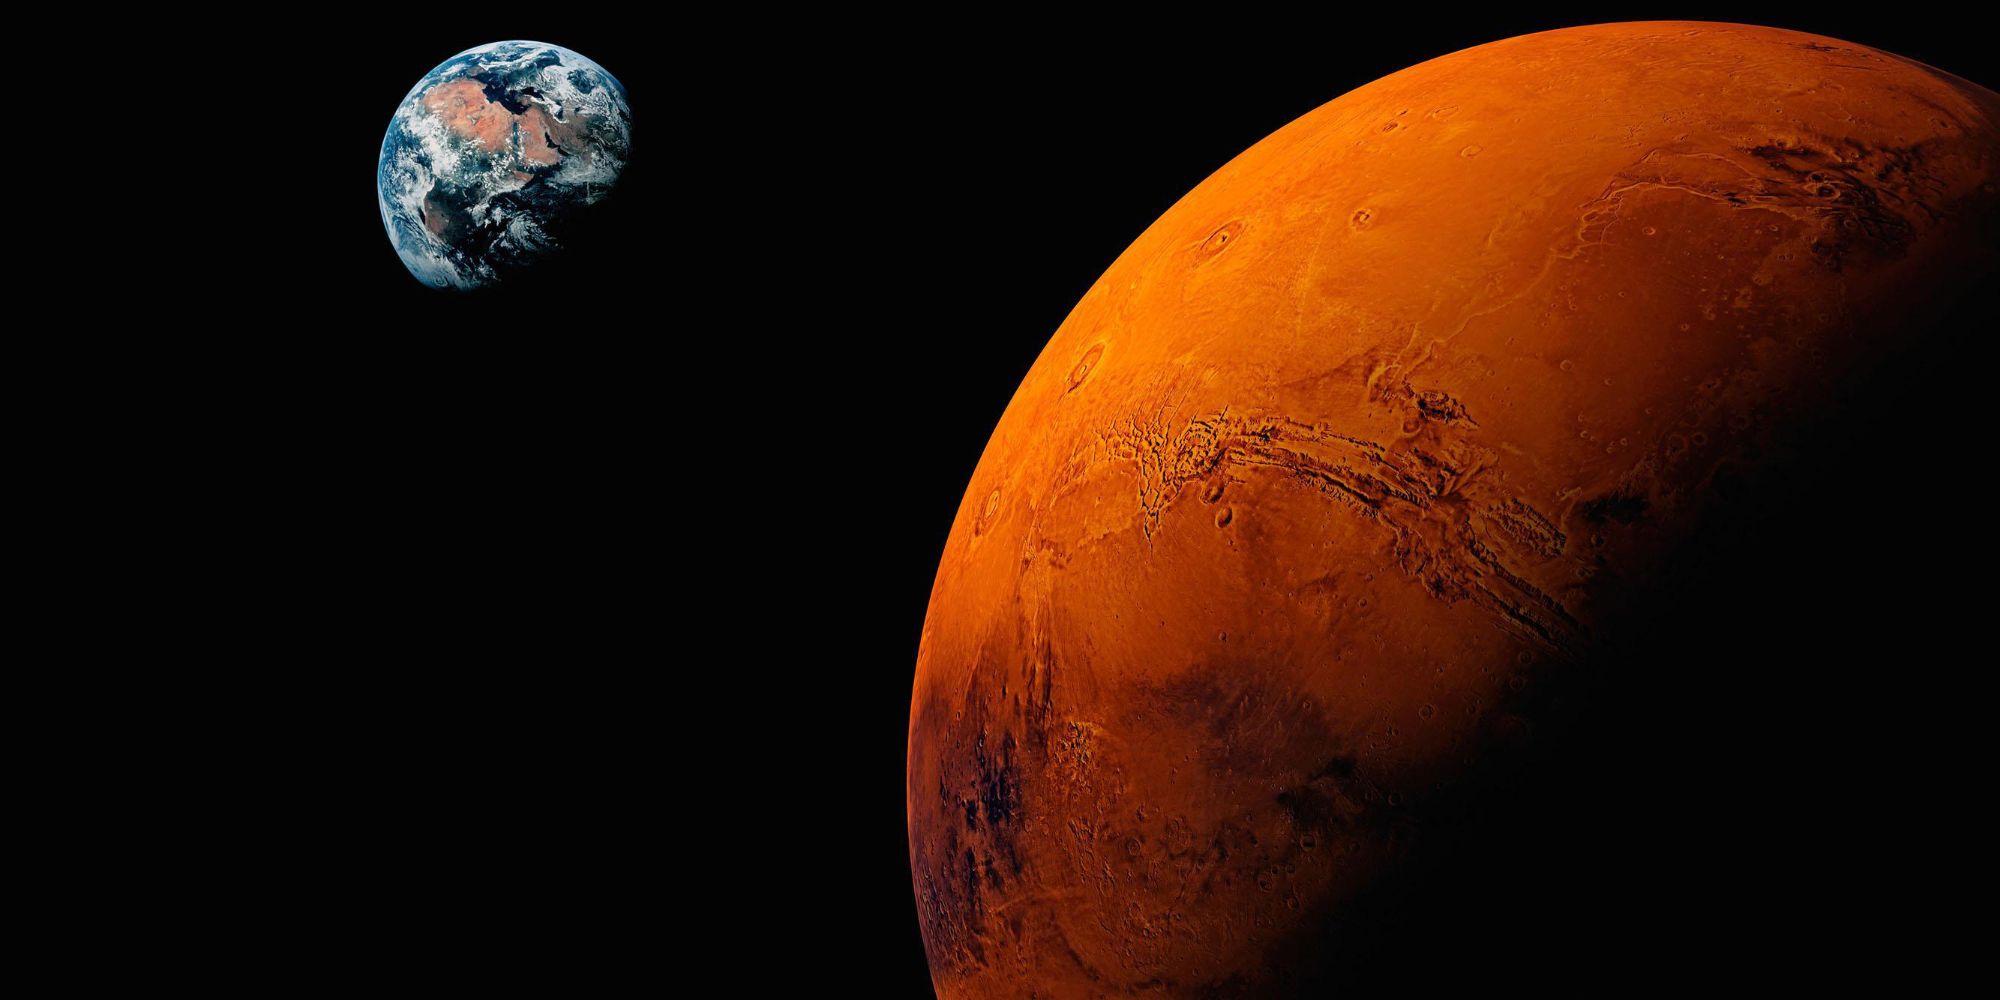 A great distance between Mars and Earth